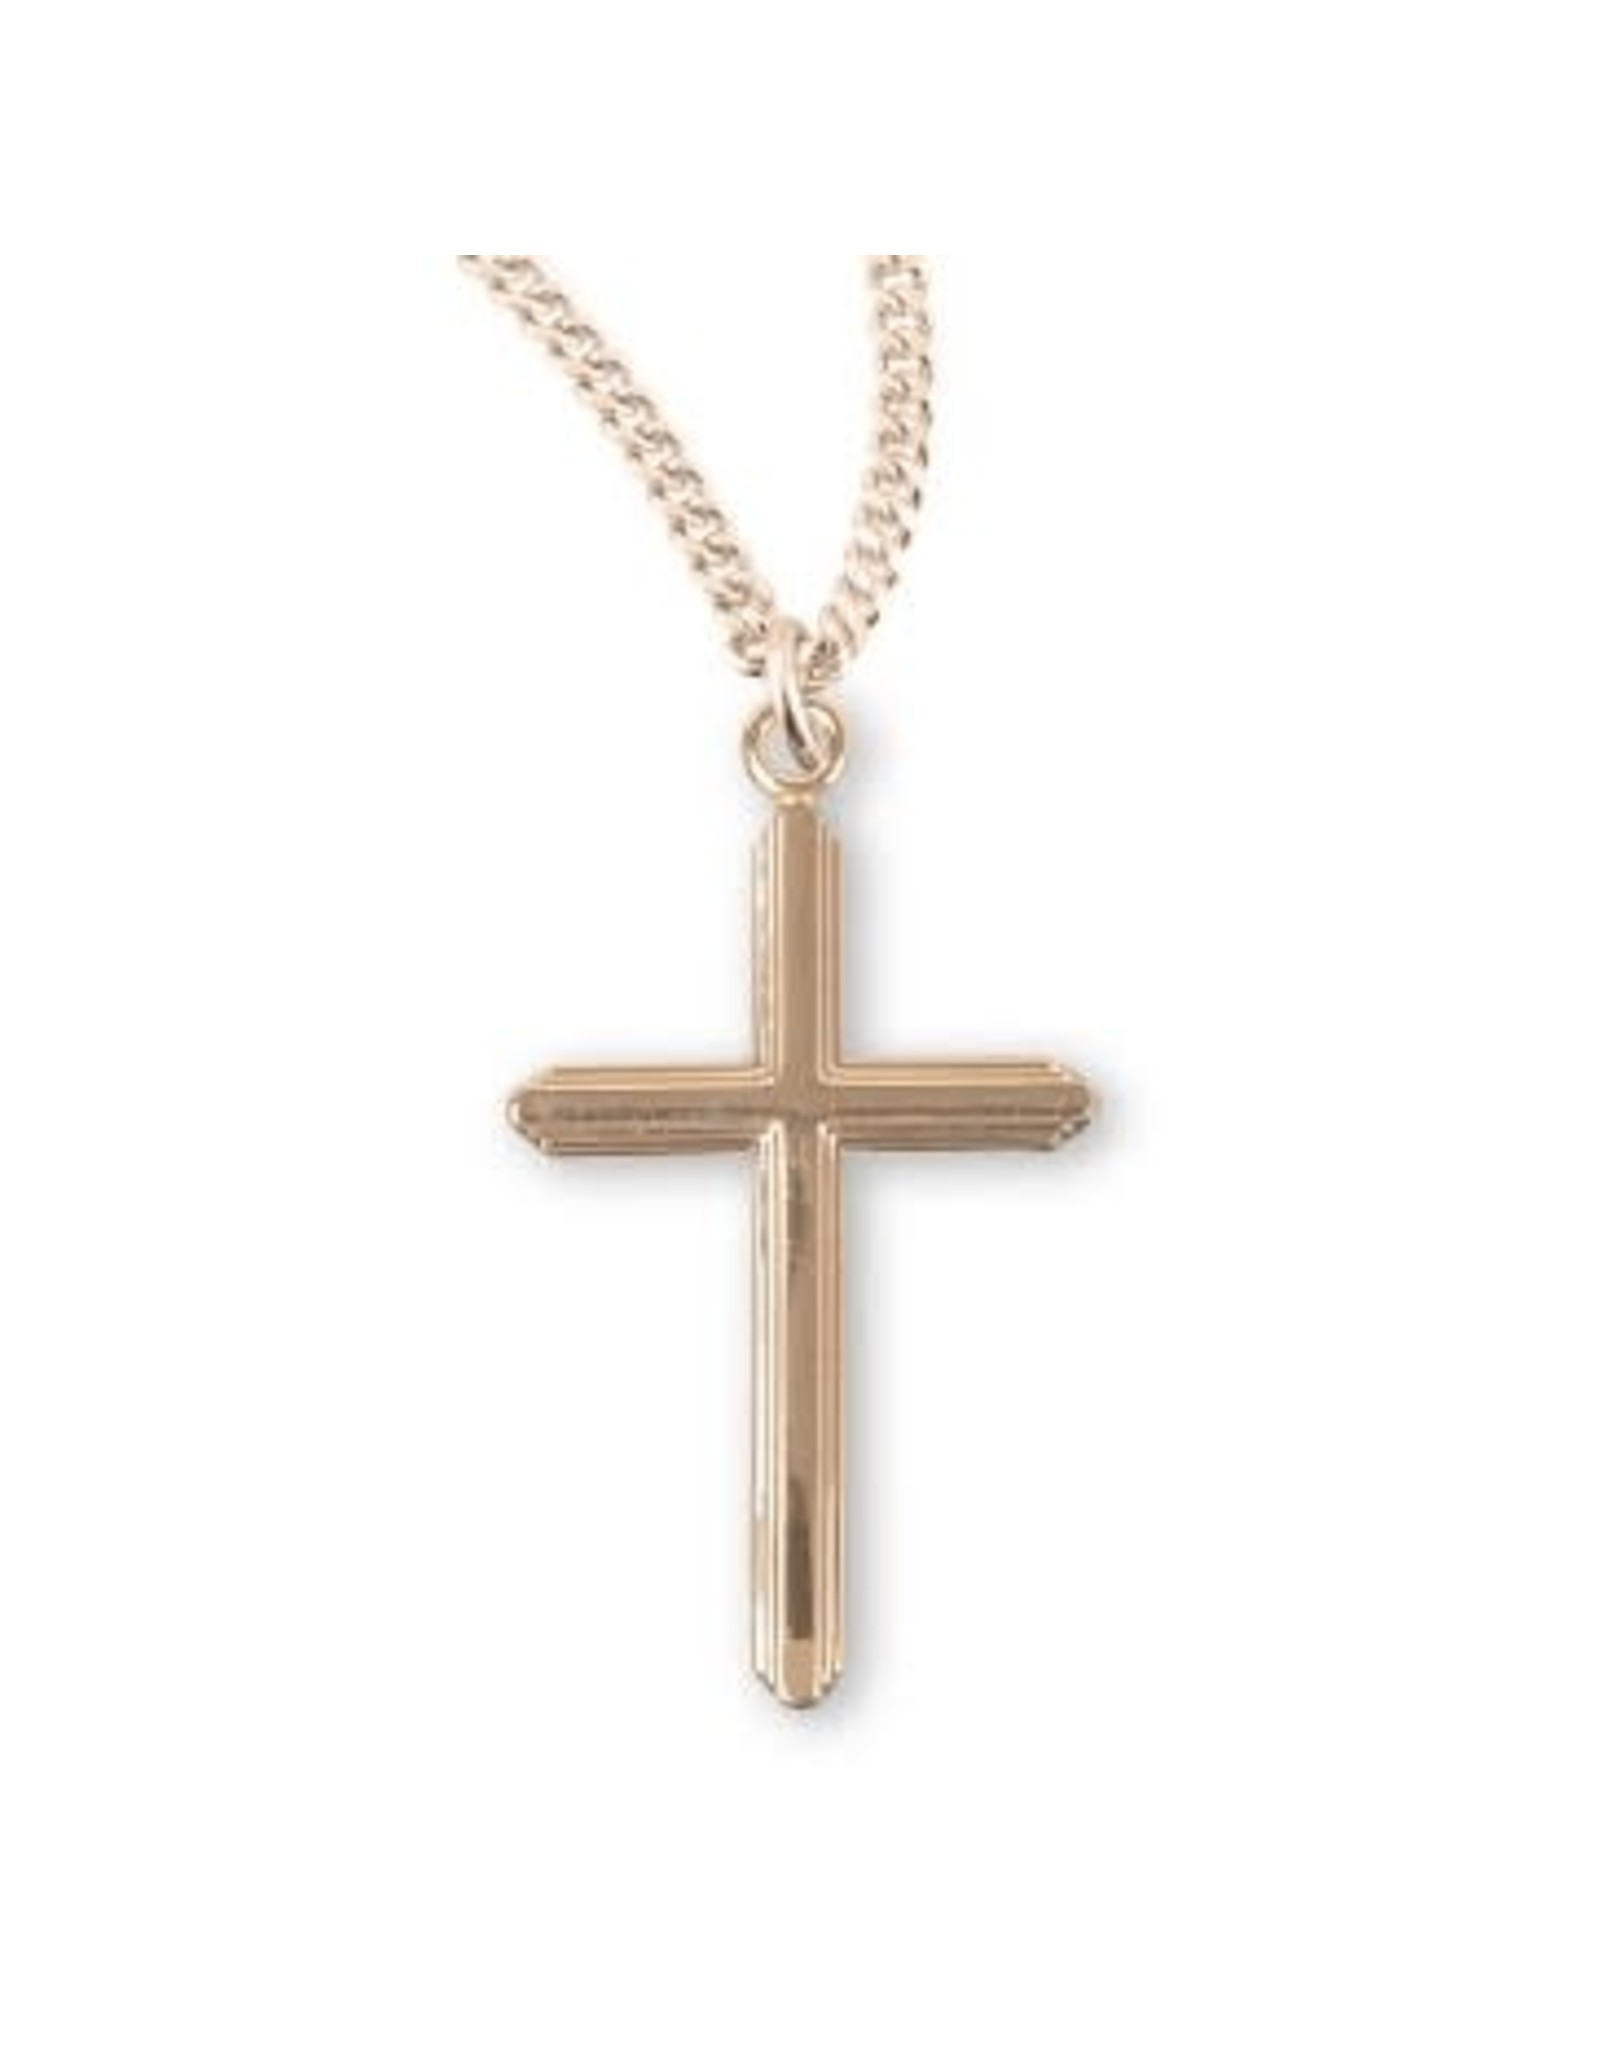 Cross Medal, Gold Over Sterling Silver, 18" Chain